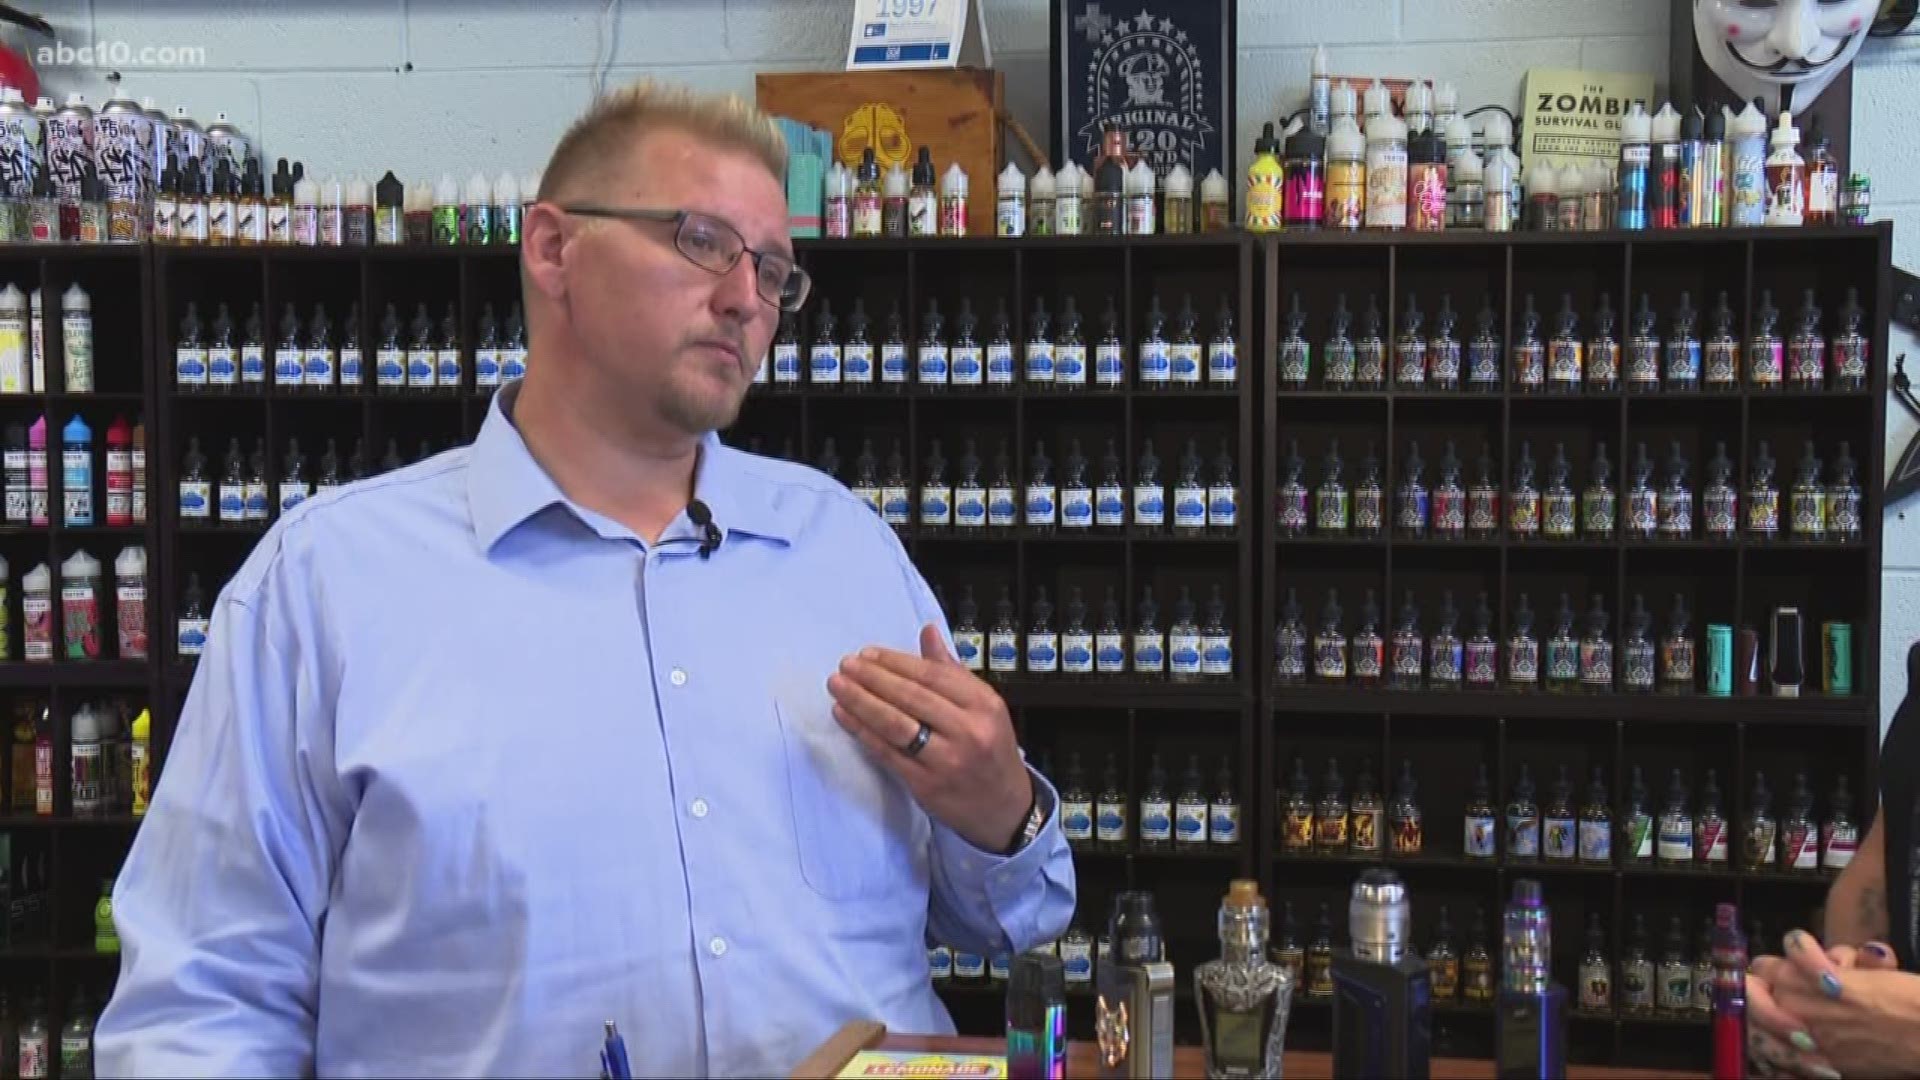 A local vape shop owner says a flavor ban will push the sale of liquid into the dangerous black market.